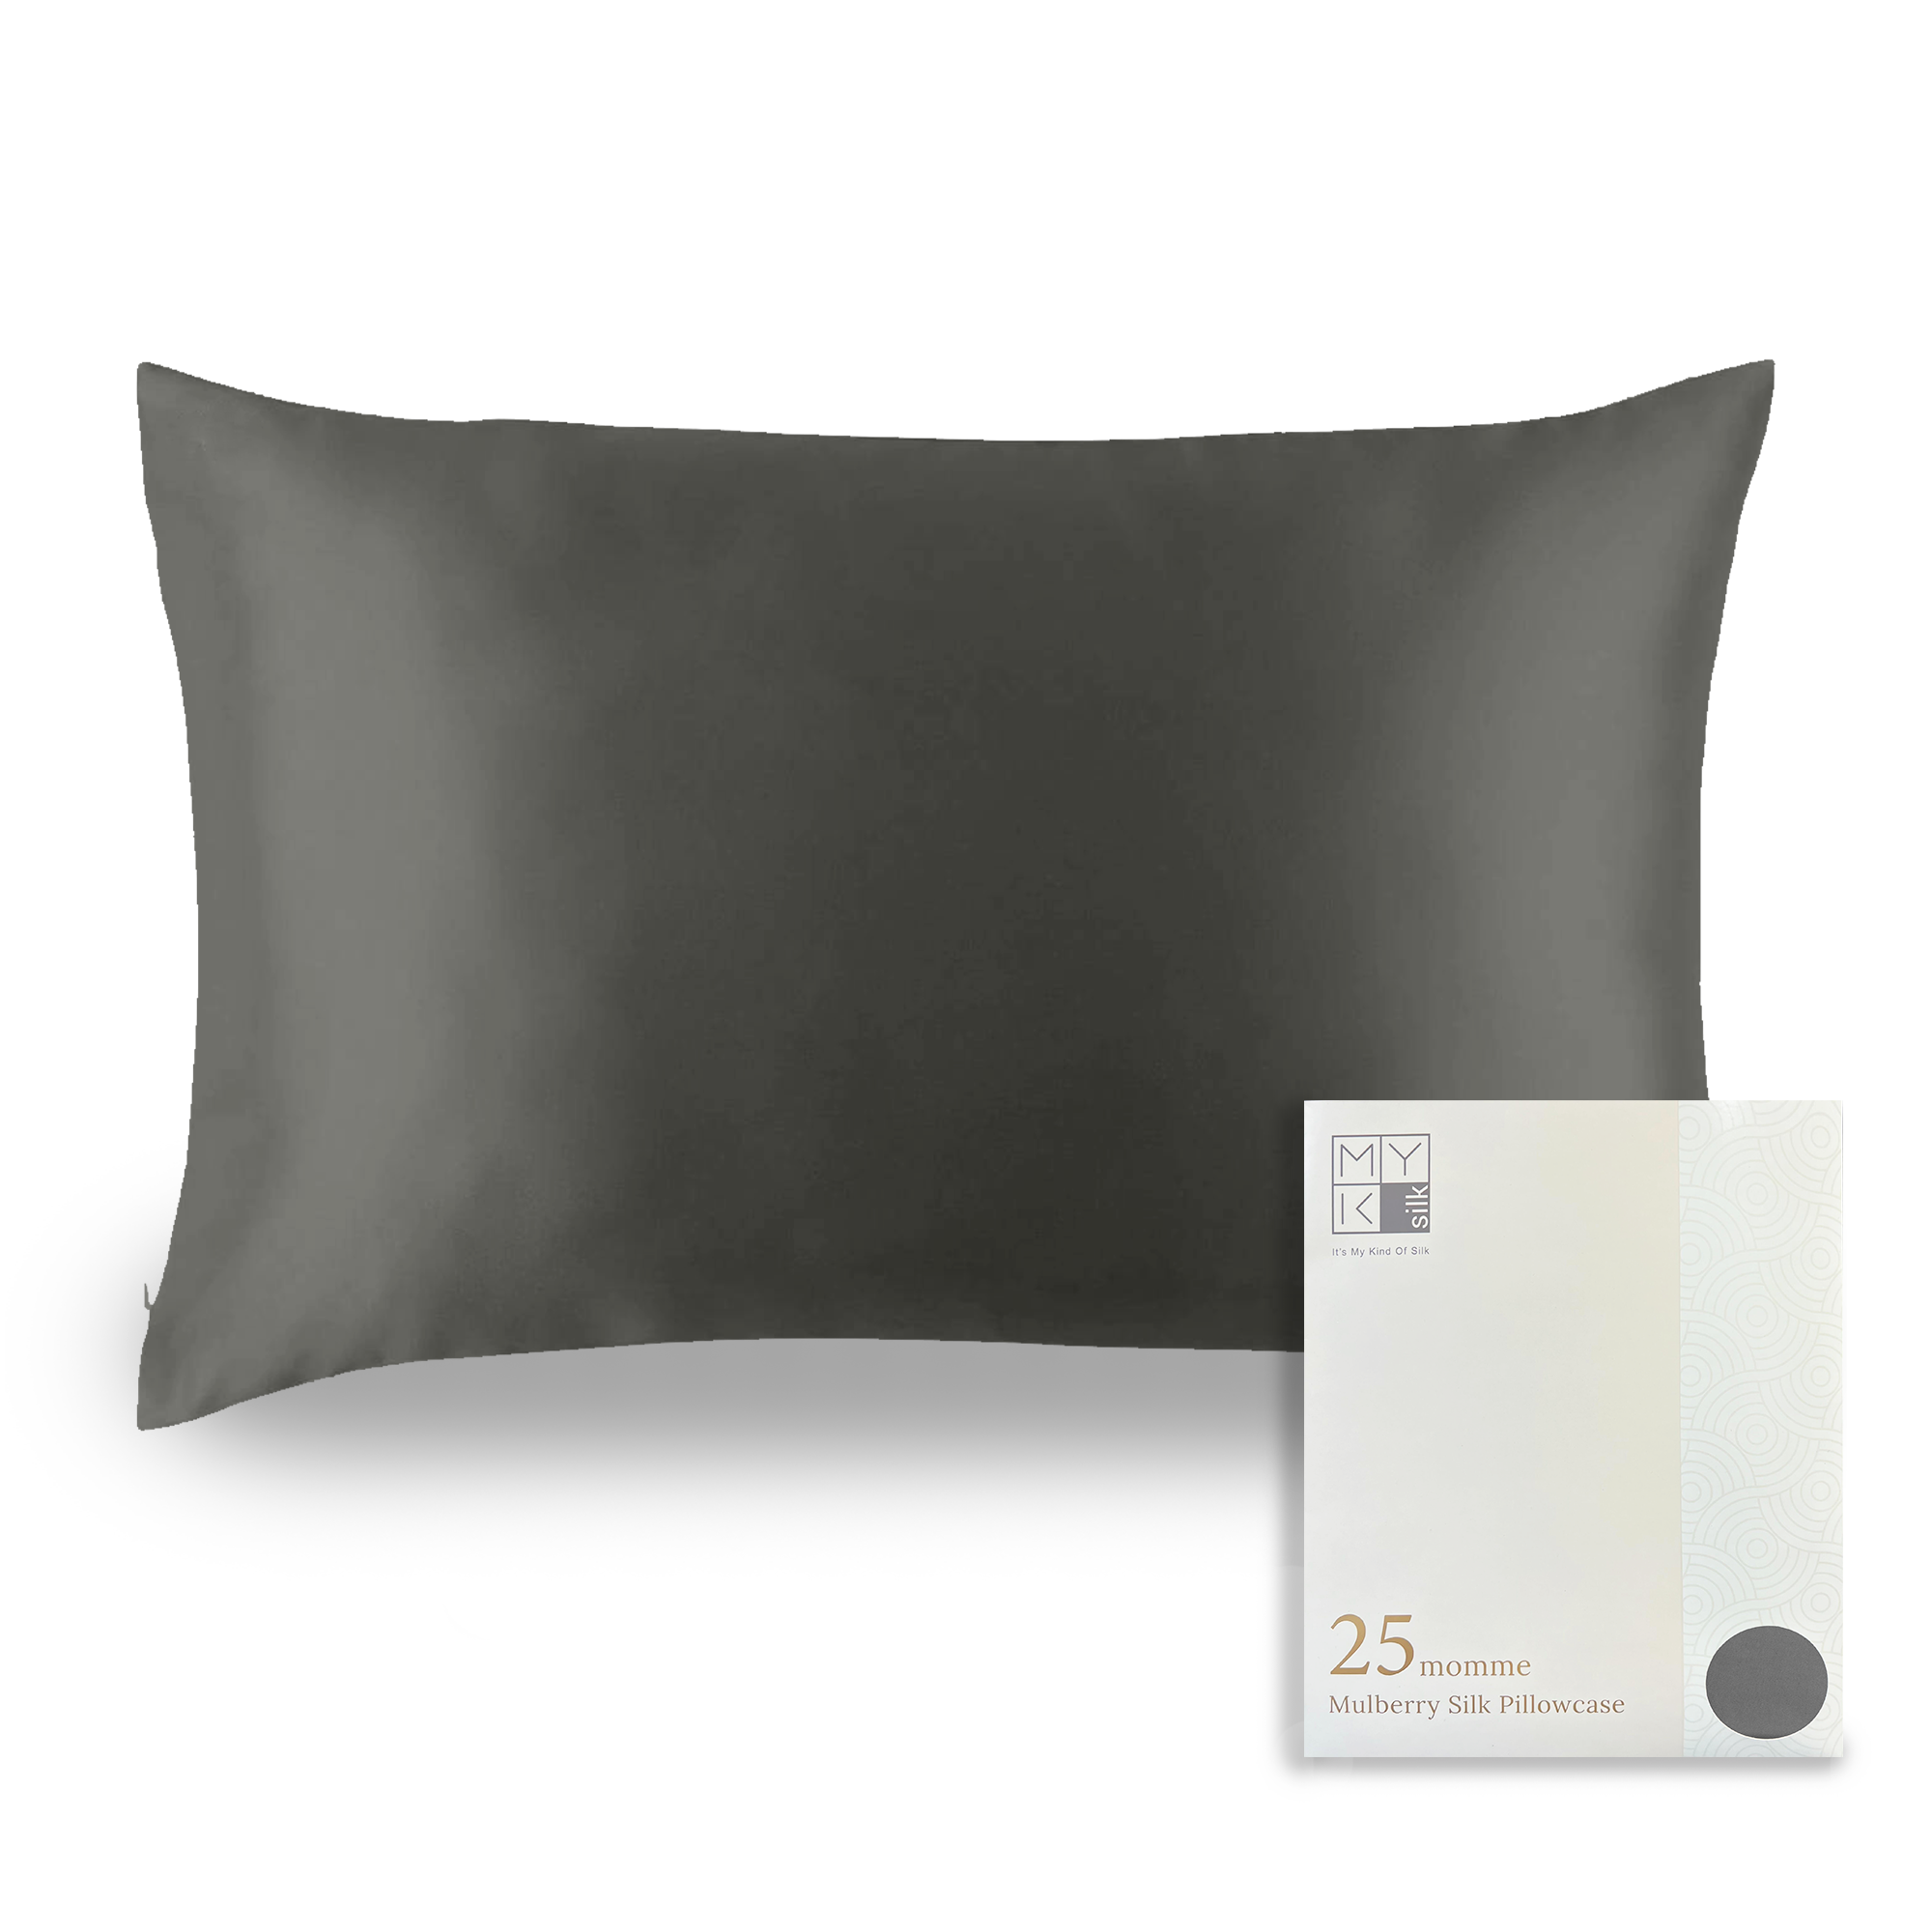 Products Luxury Mulberry Silk Pillowcase (25 momme) - MYK Silk #color_charcoal grey